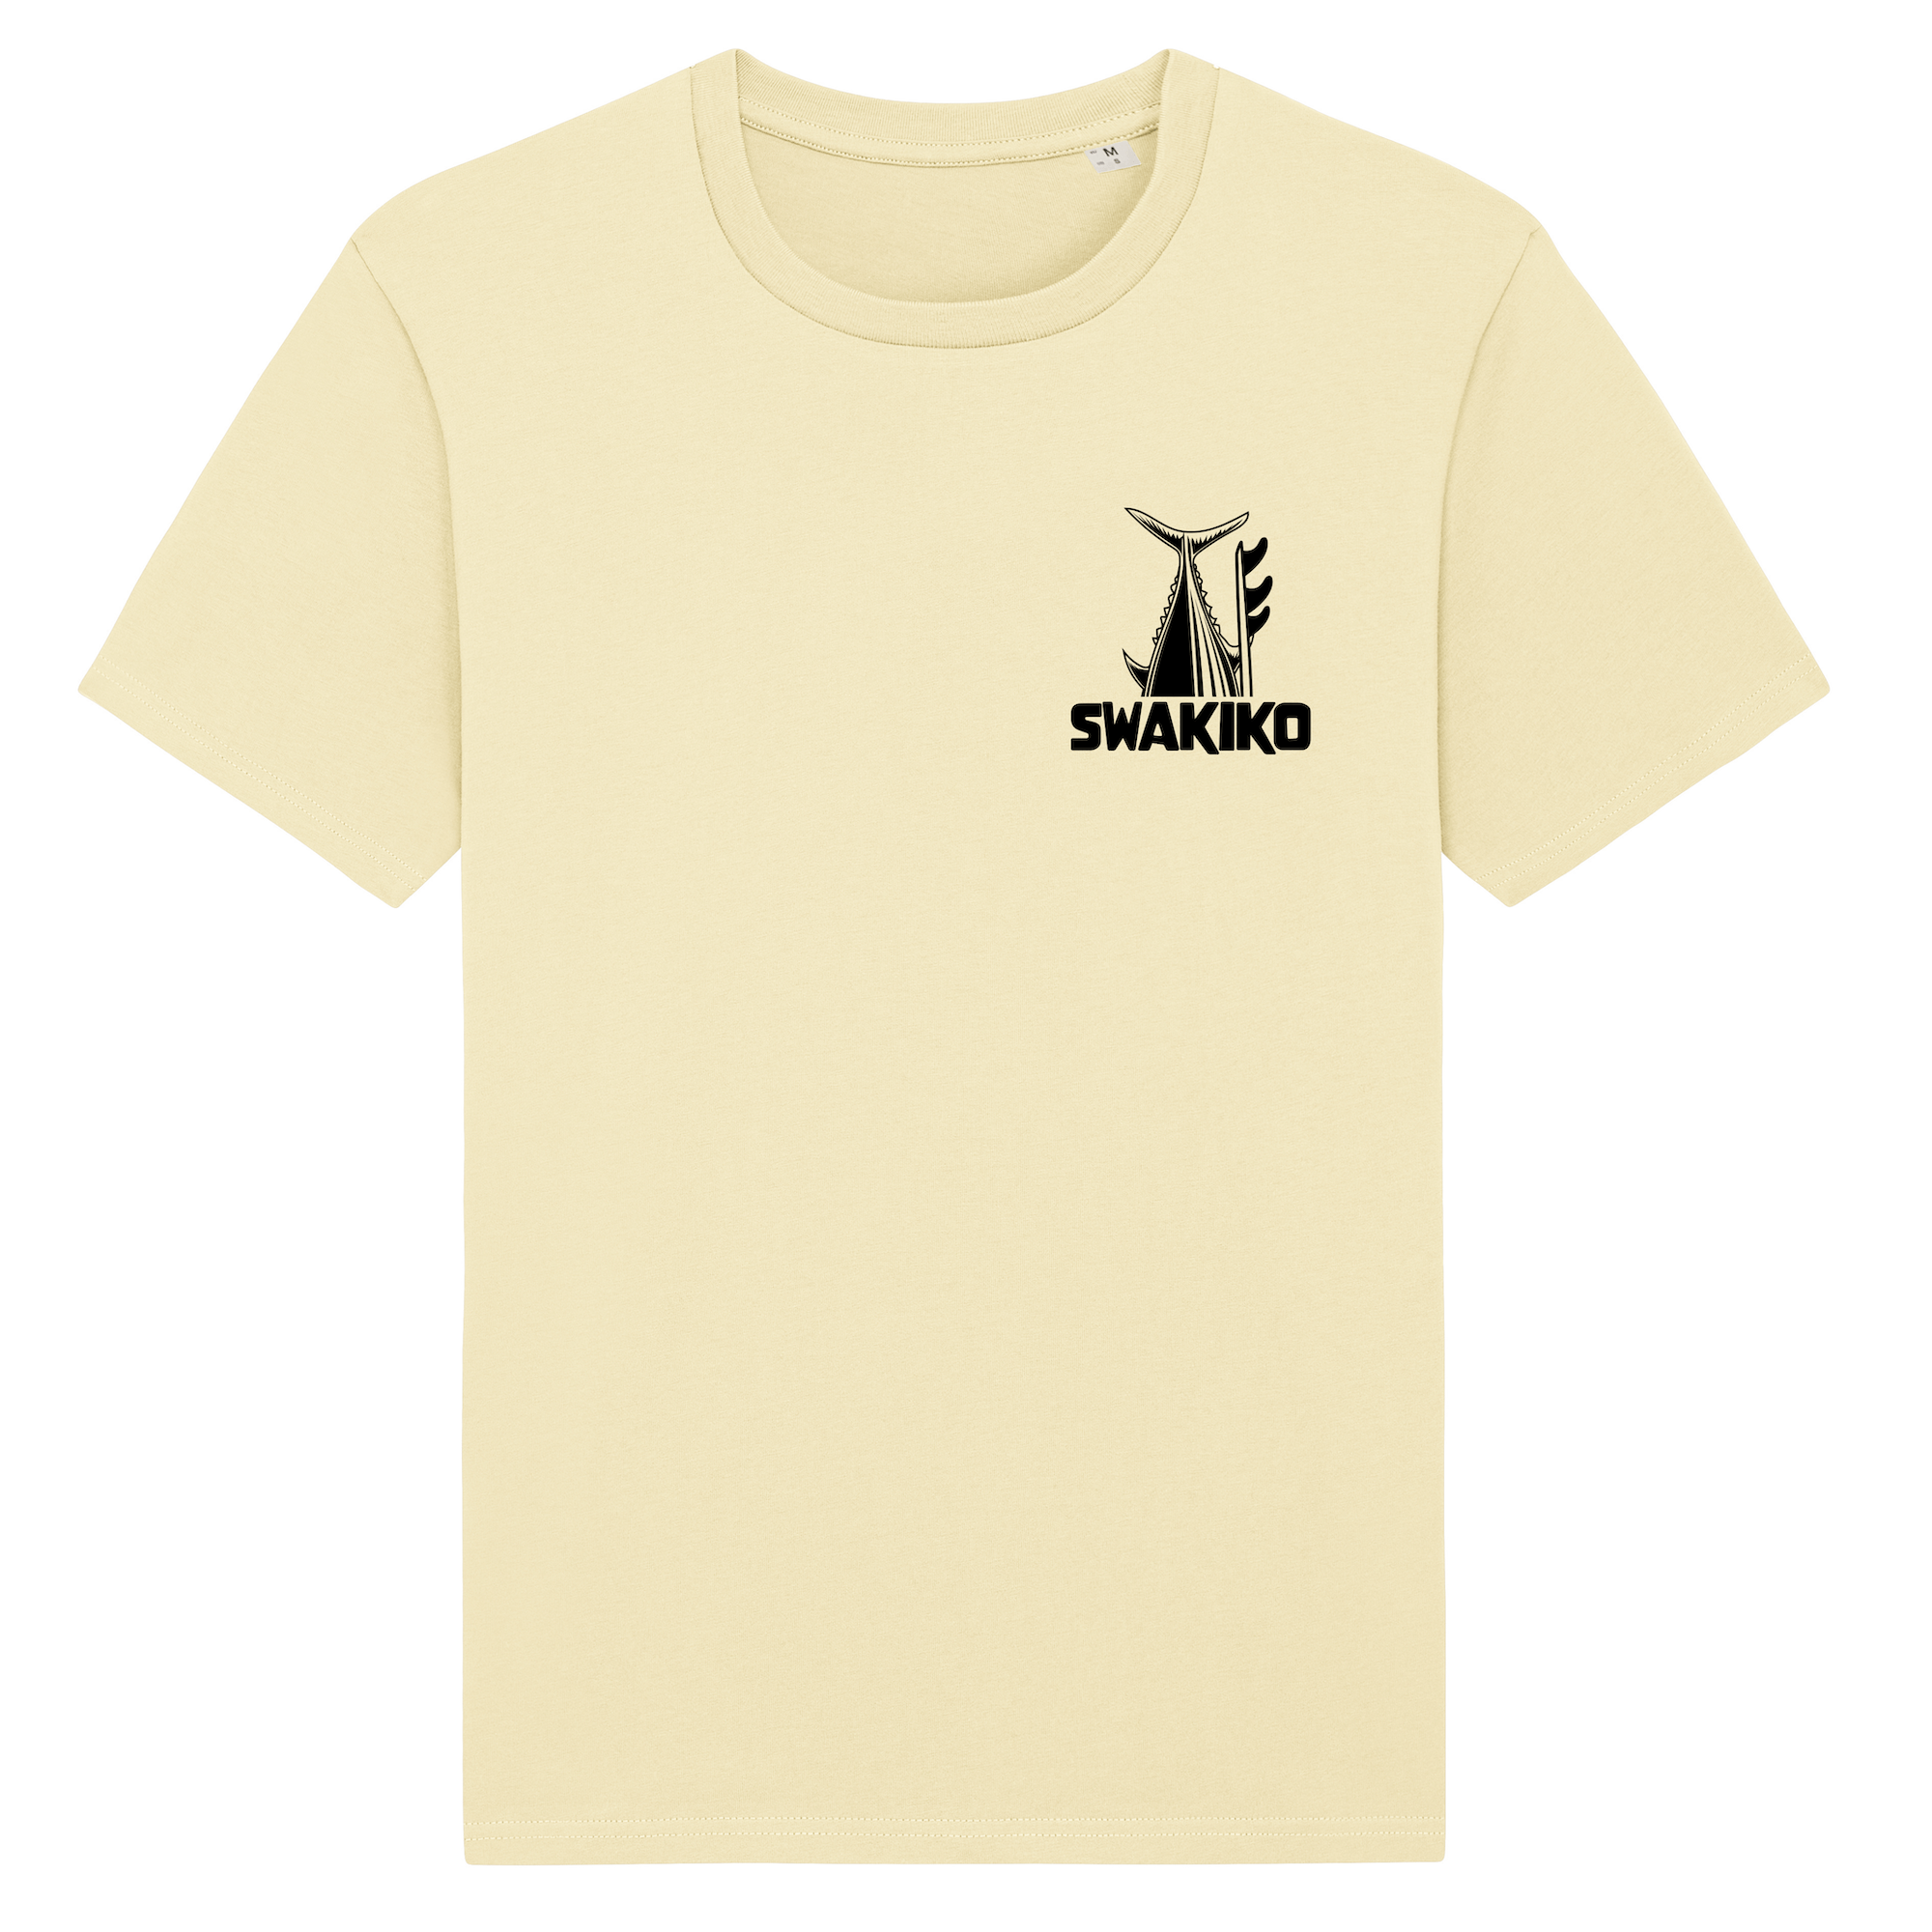 Surfing Tuna T-shirt, yellow front